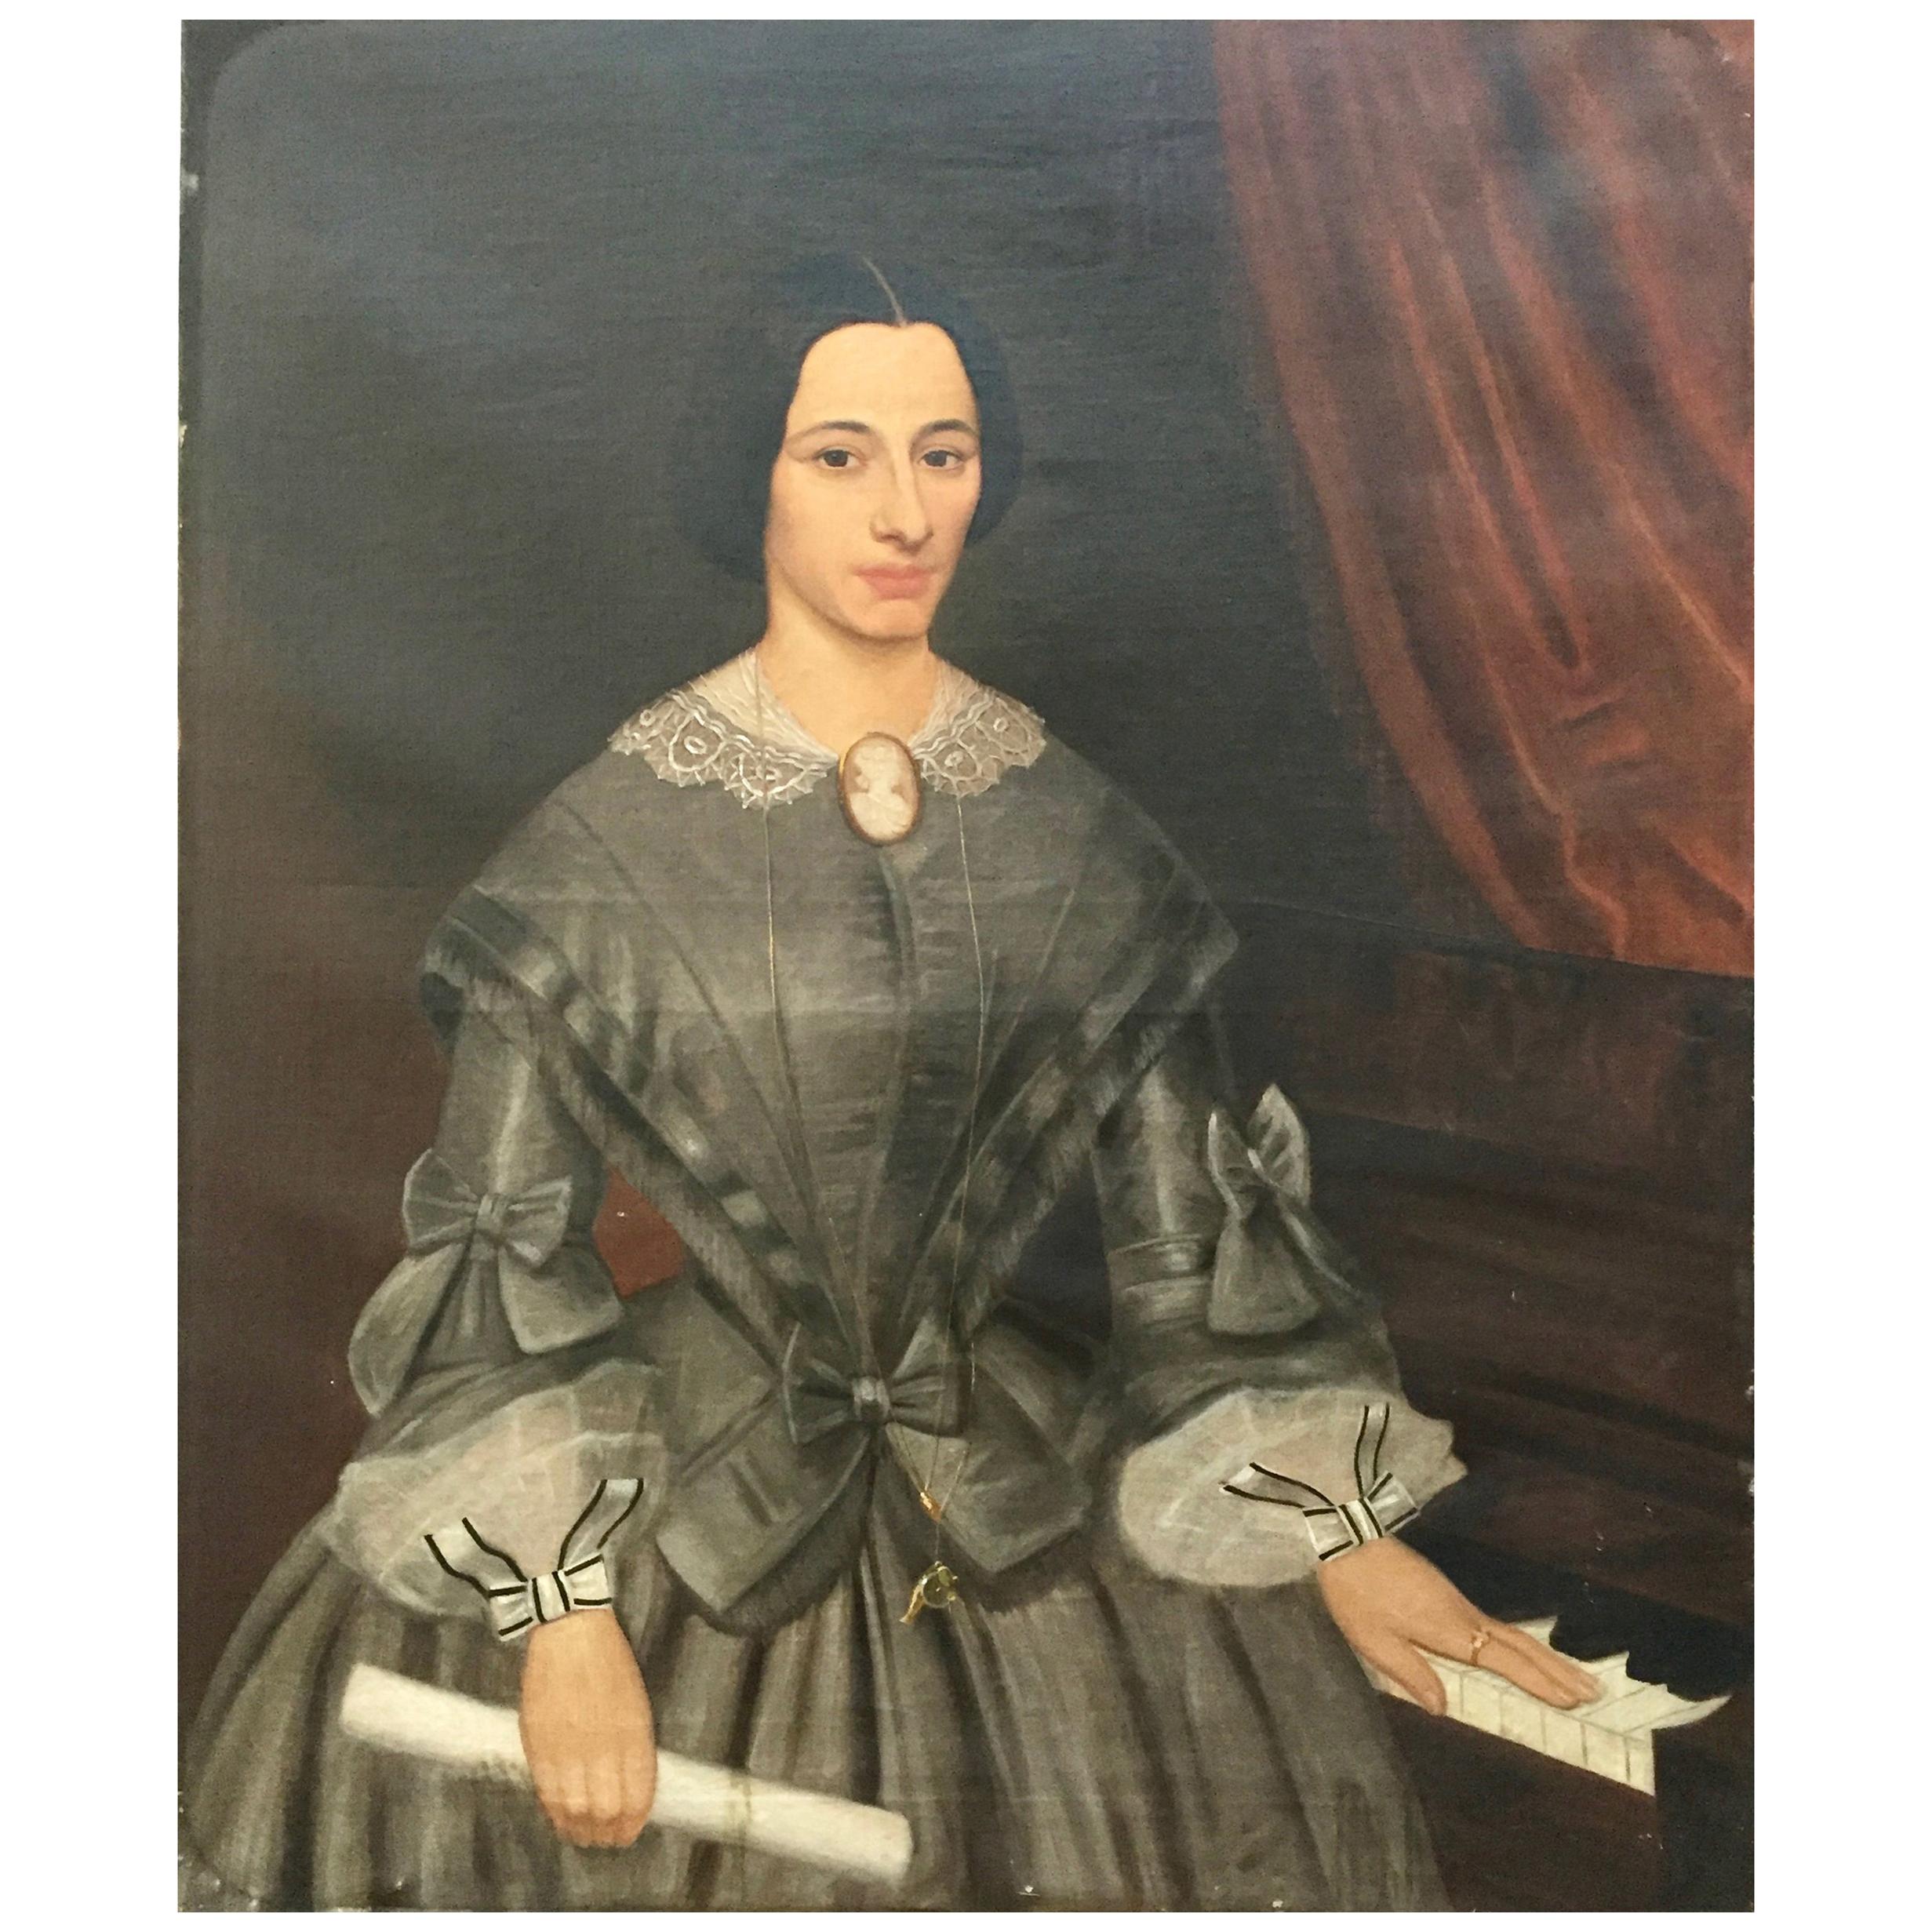 Signed and Dated Large 19th Century Portrait of a Lady with Her Piano